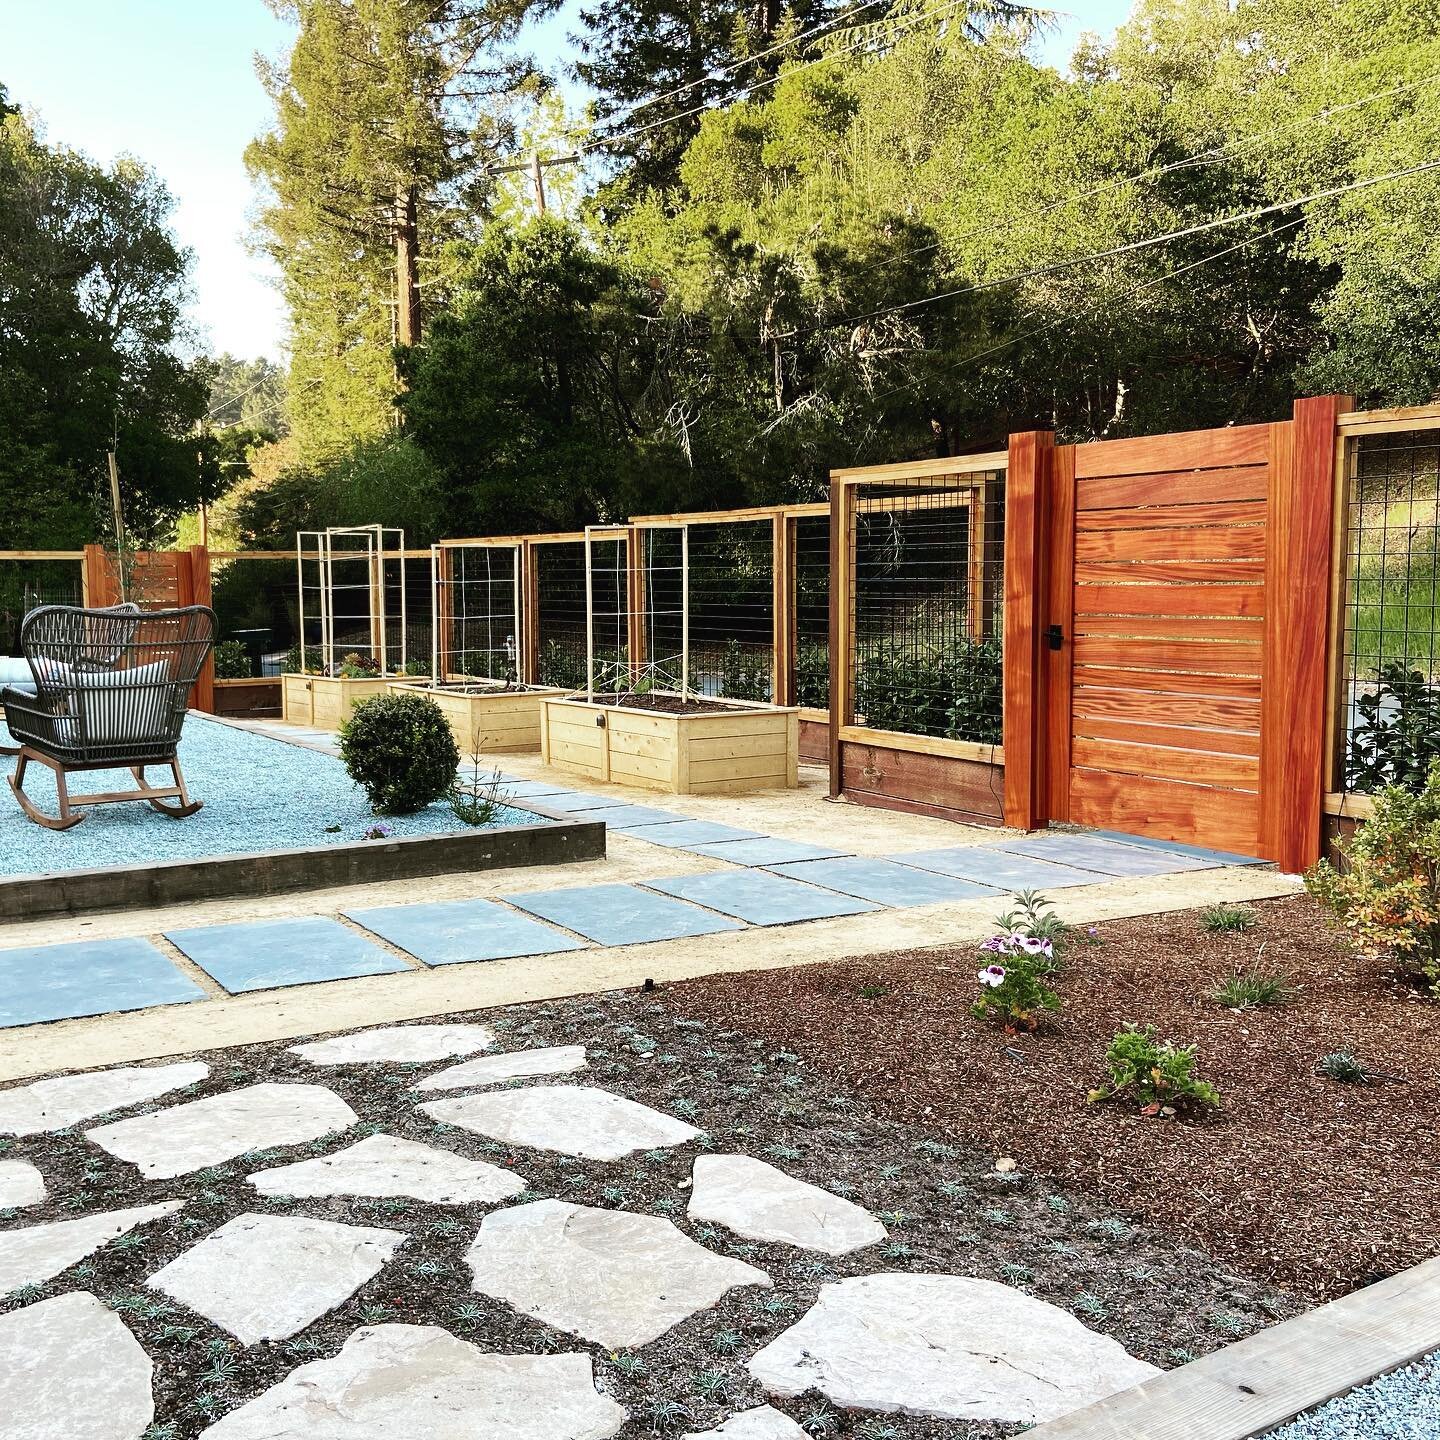 Custom mahogany gate finally installed! Thanks @berkeleymills! This garden used to be an unused, water-thirsty lawn. We transformed it into an outdoor lounge with veggie boxes for food production and a low-water, bee and butterfly garden. More photos